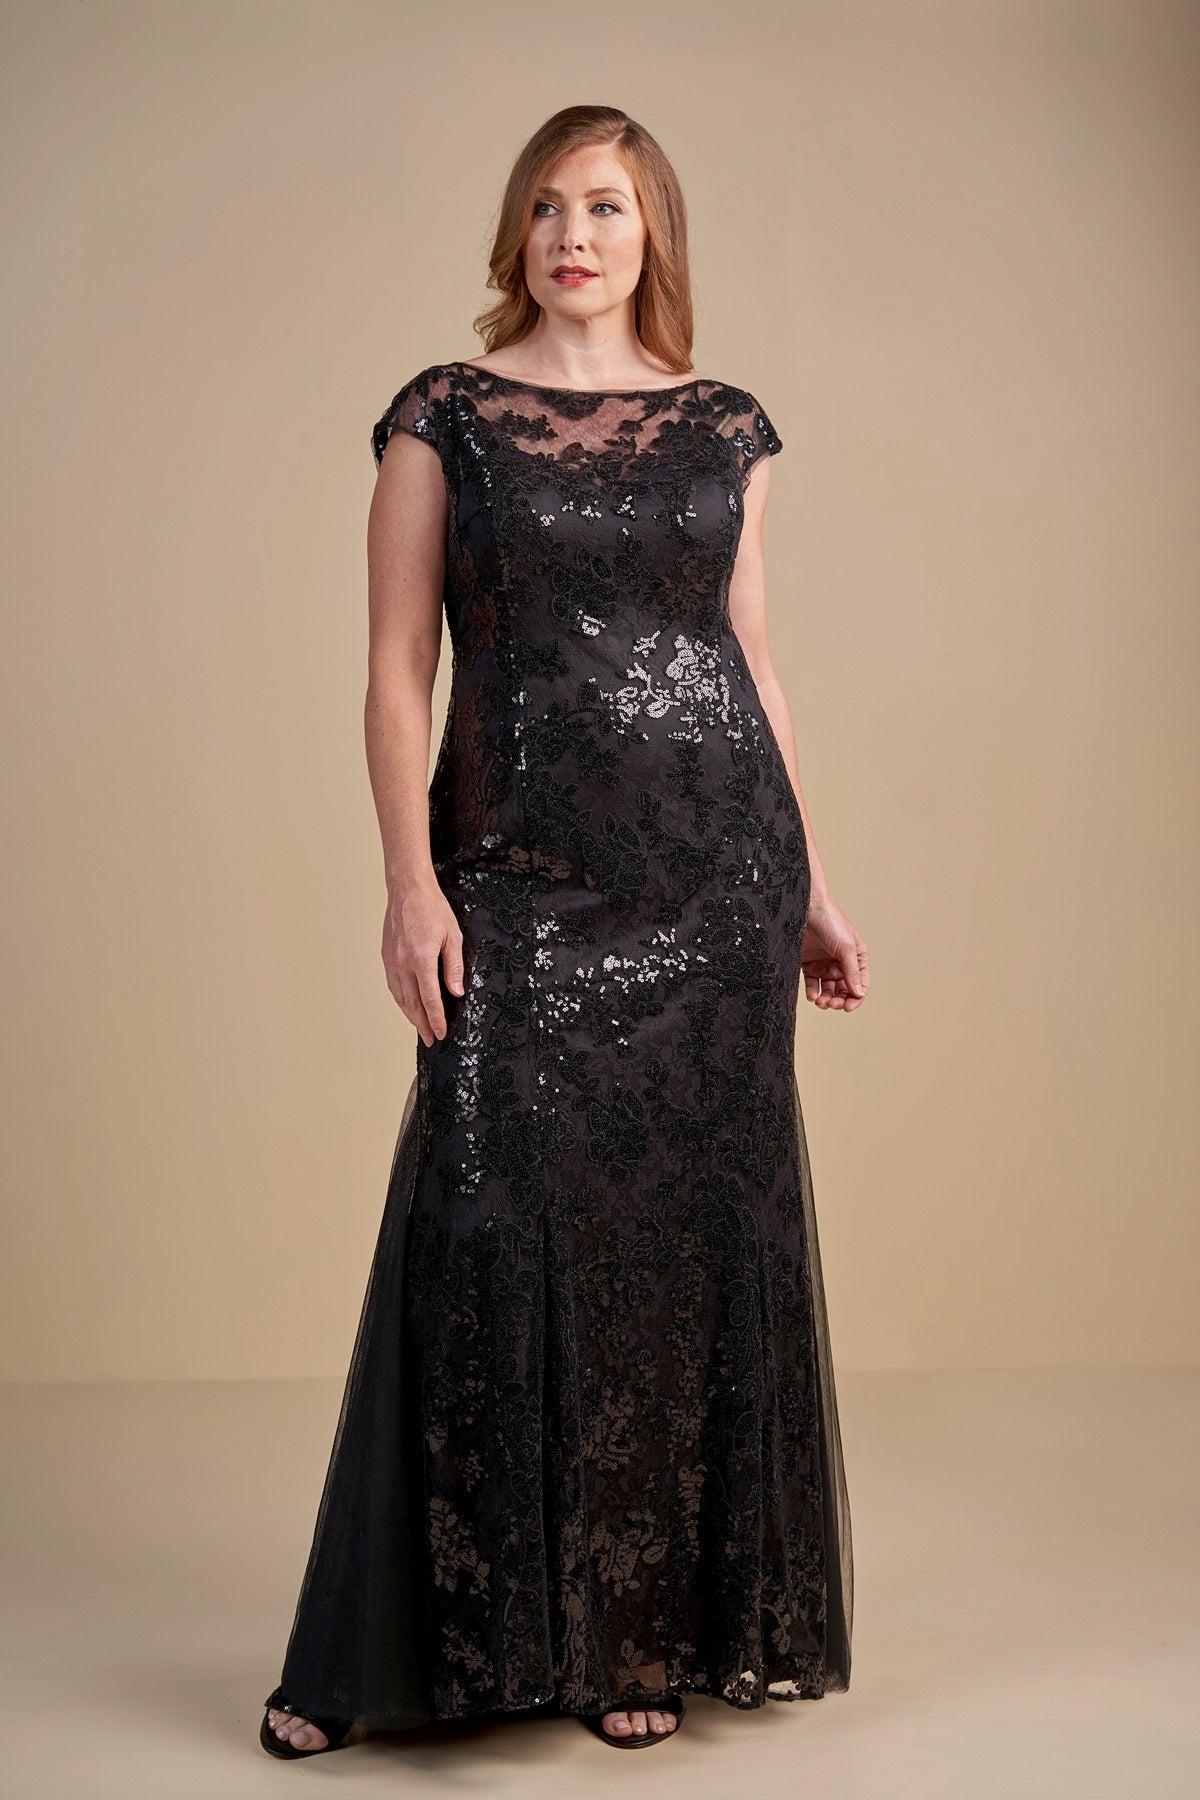 Jade Couture K198011 Cap Sleeve Sequins Lace Illusion Dress